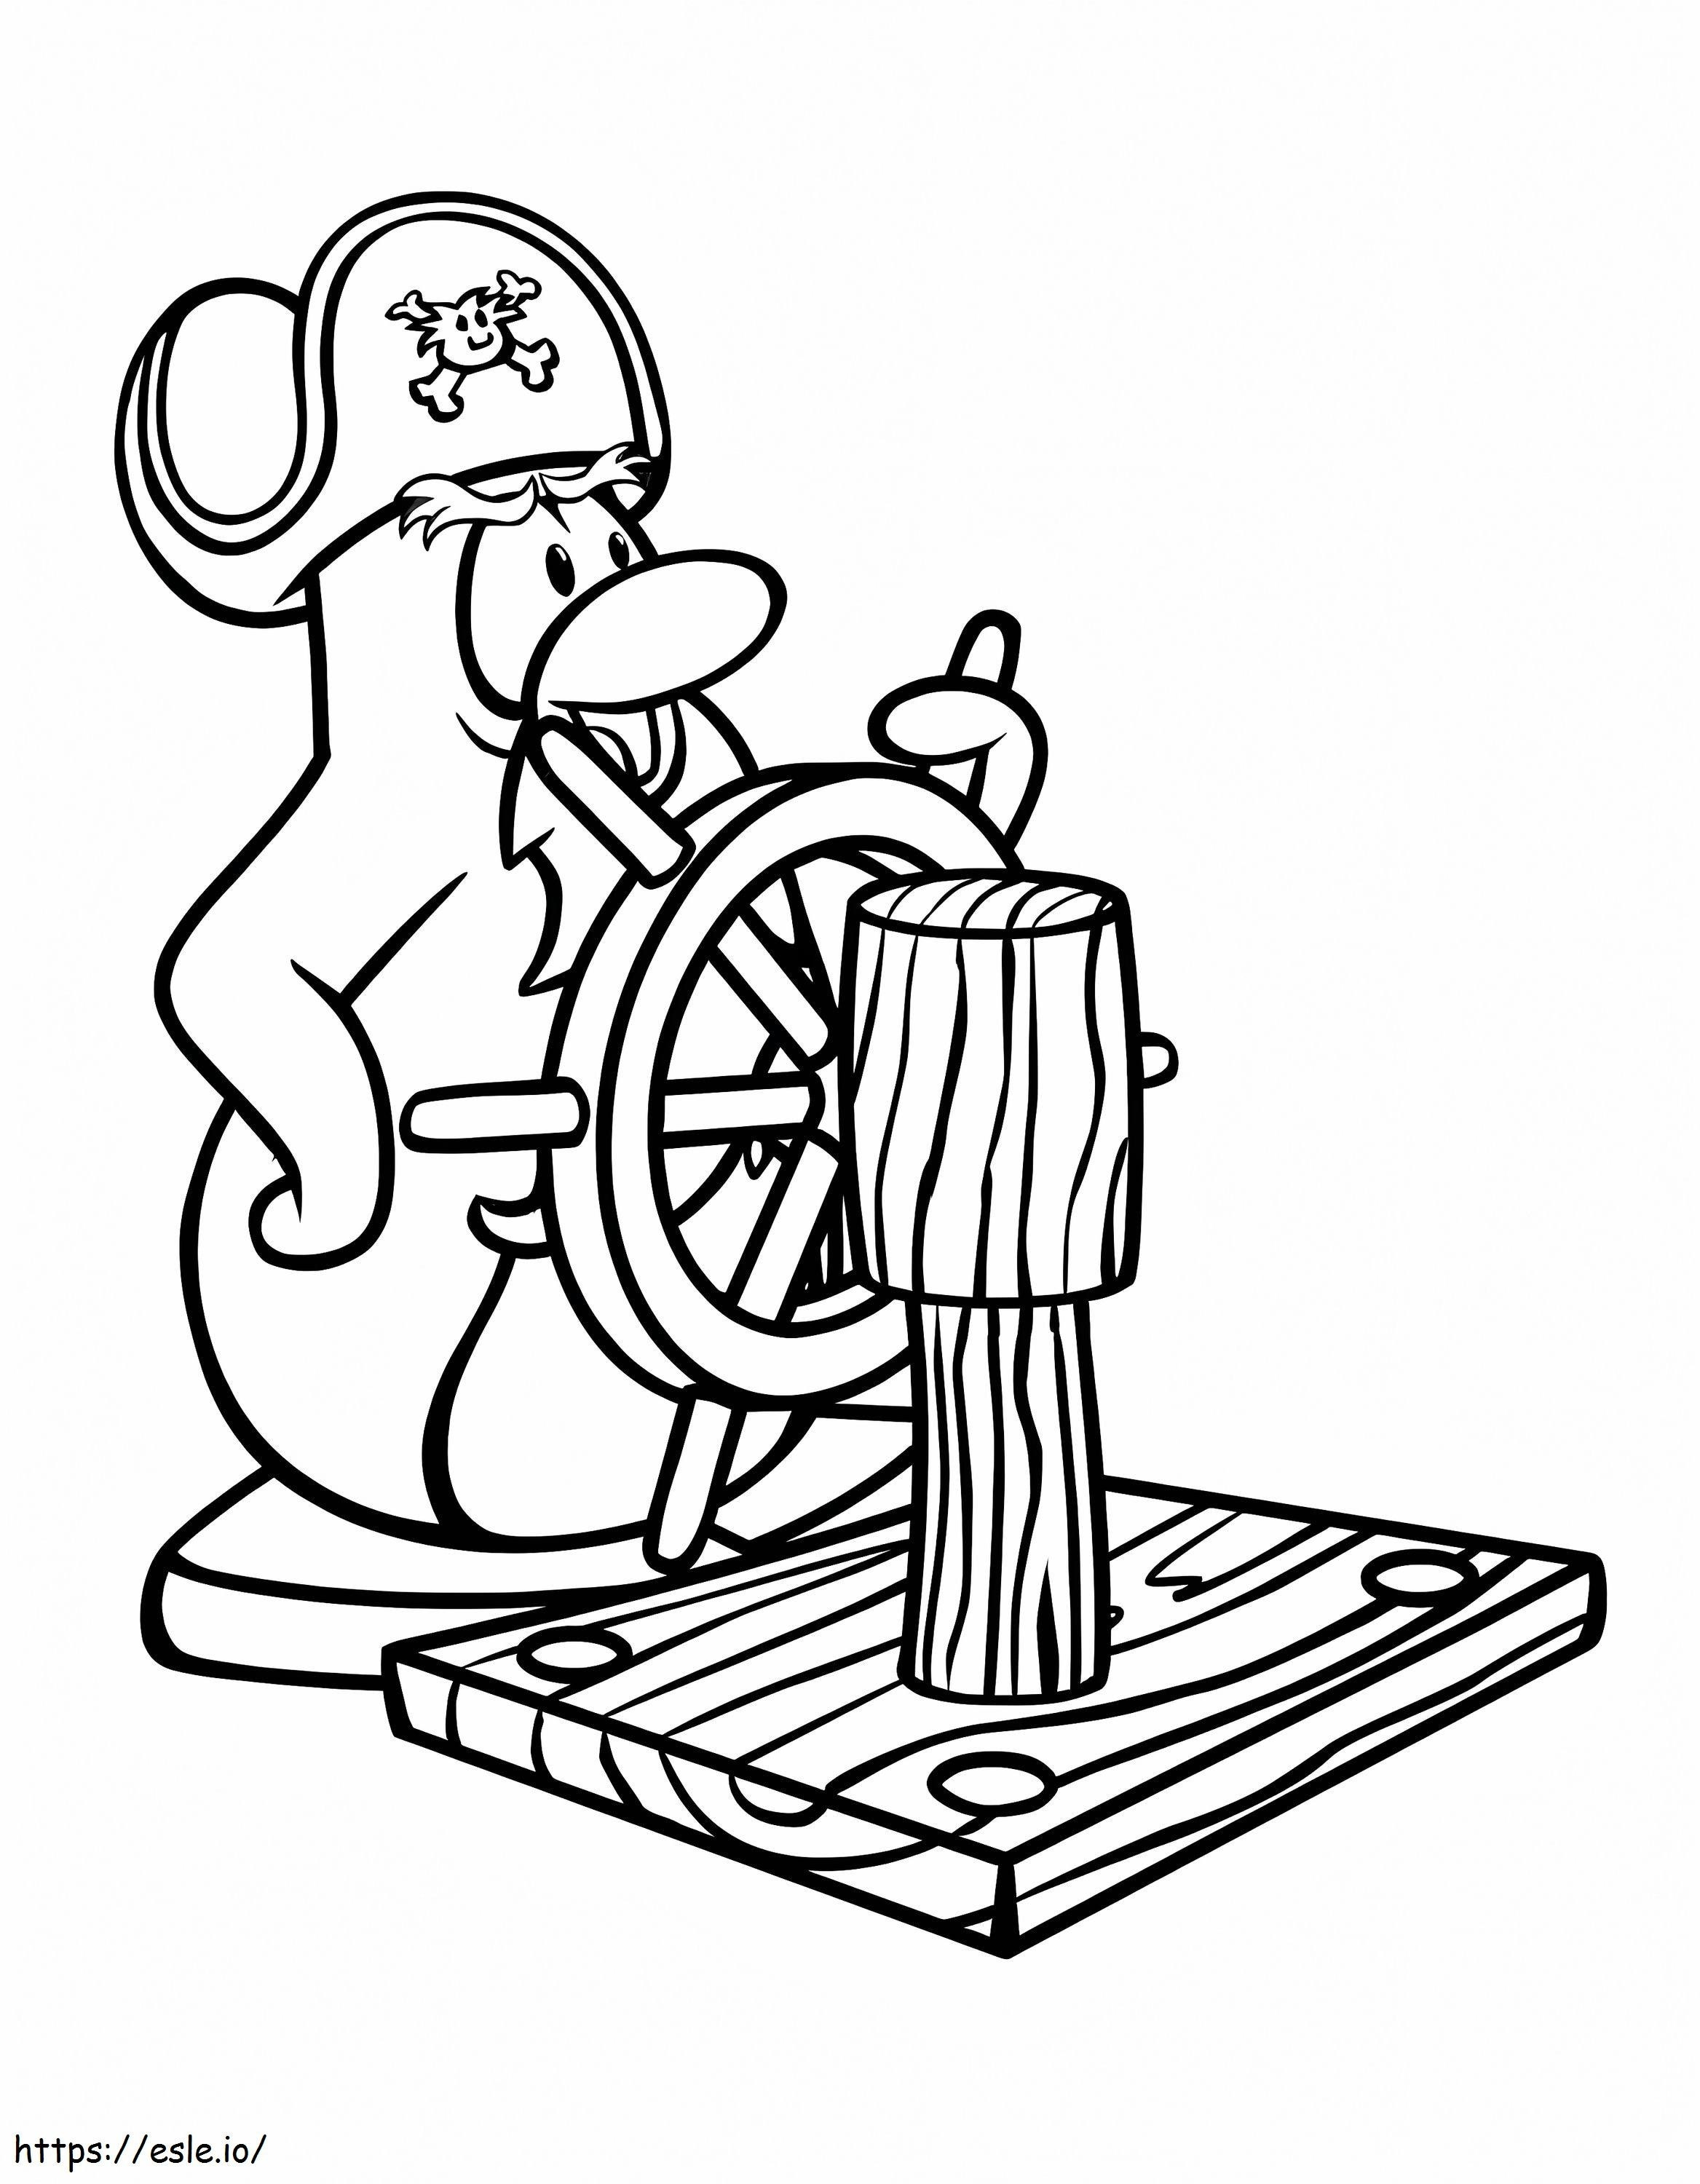 Club Penguin Pirate coloring page